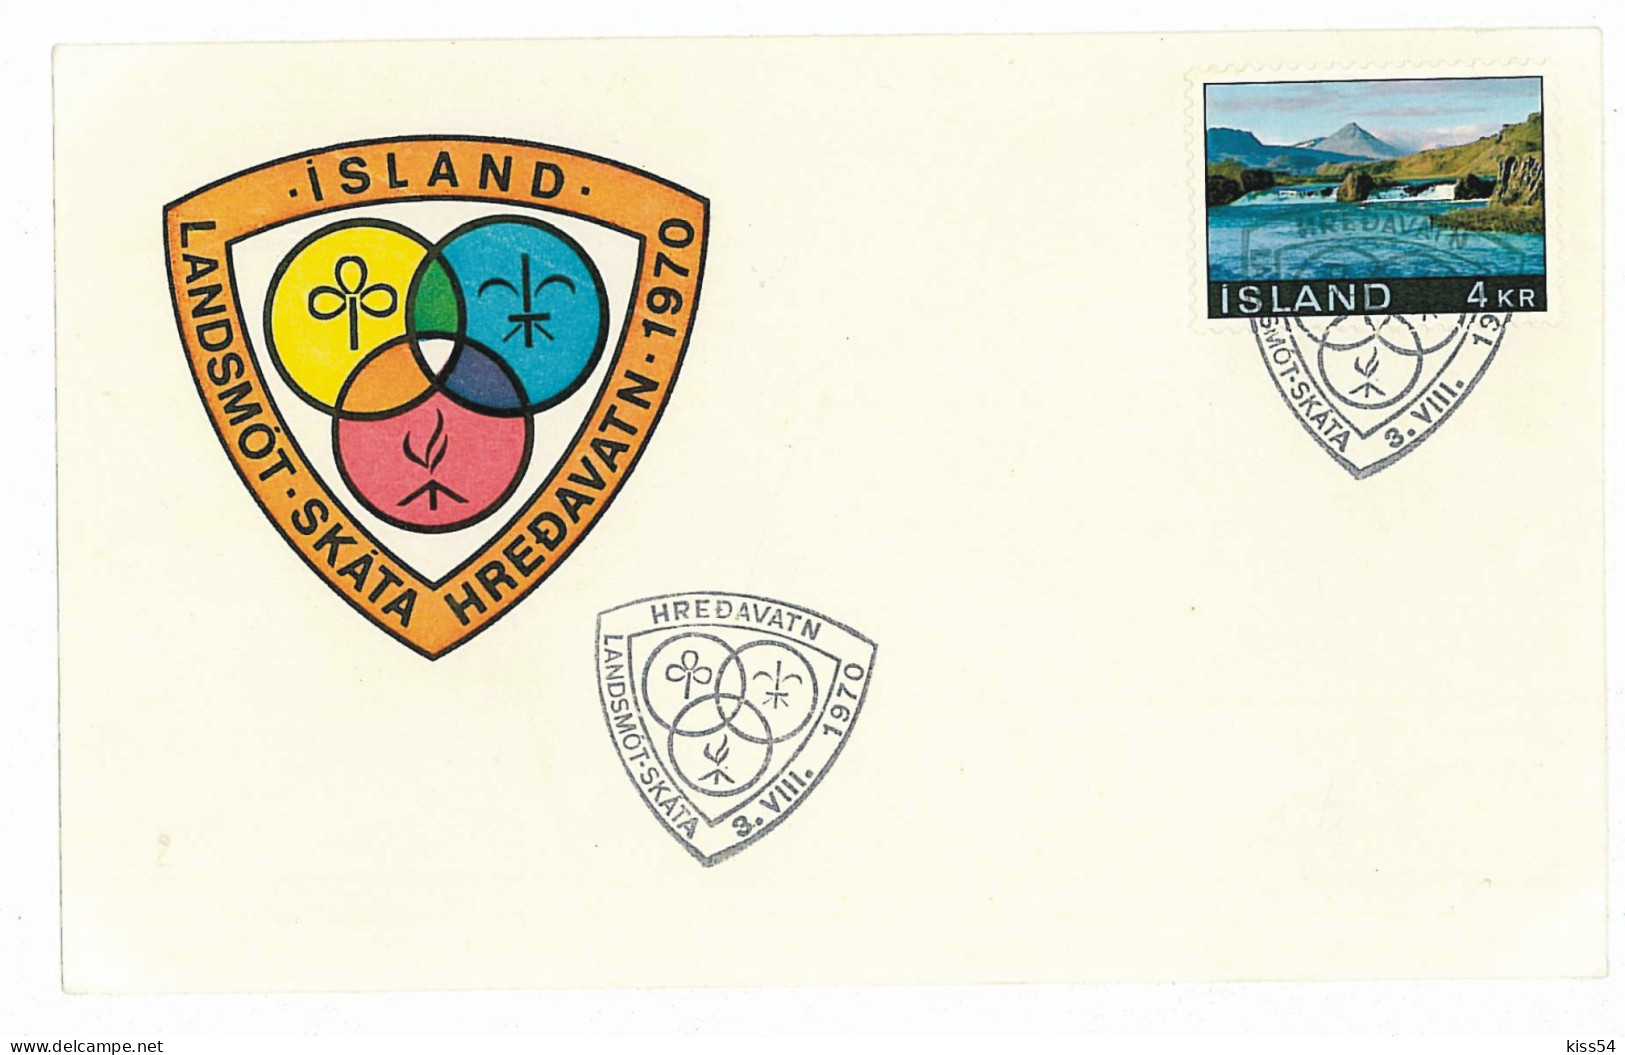 SC 28 - 816 ISLAND, Scout - Cover - Used - 1970 - Covers & Documents